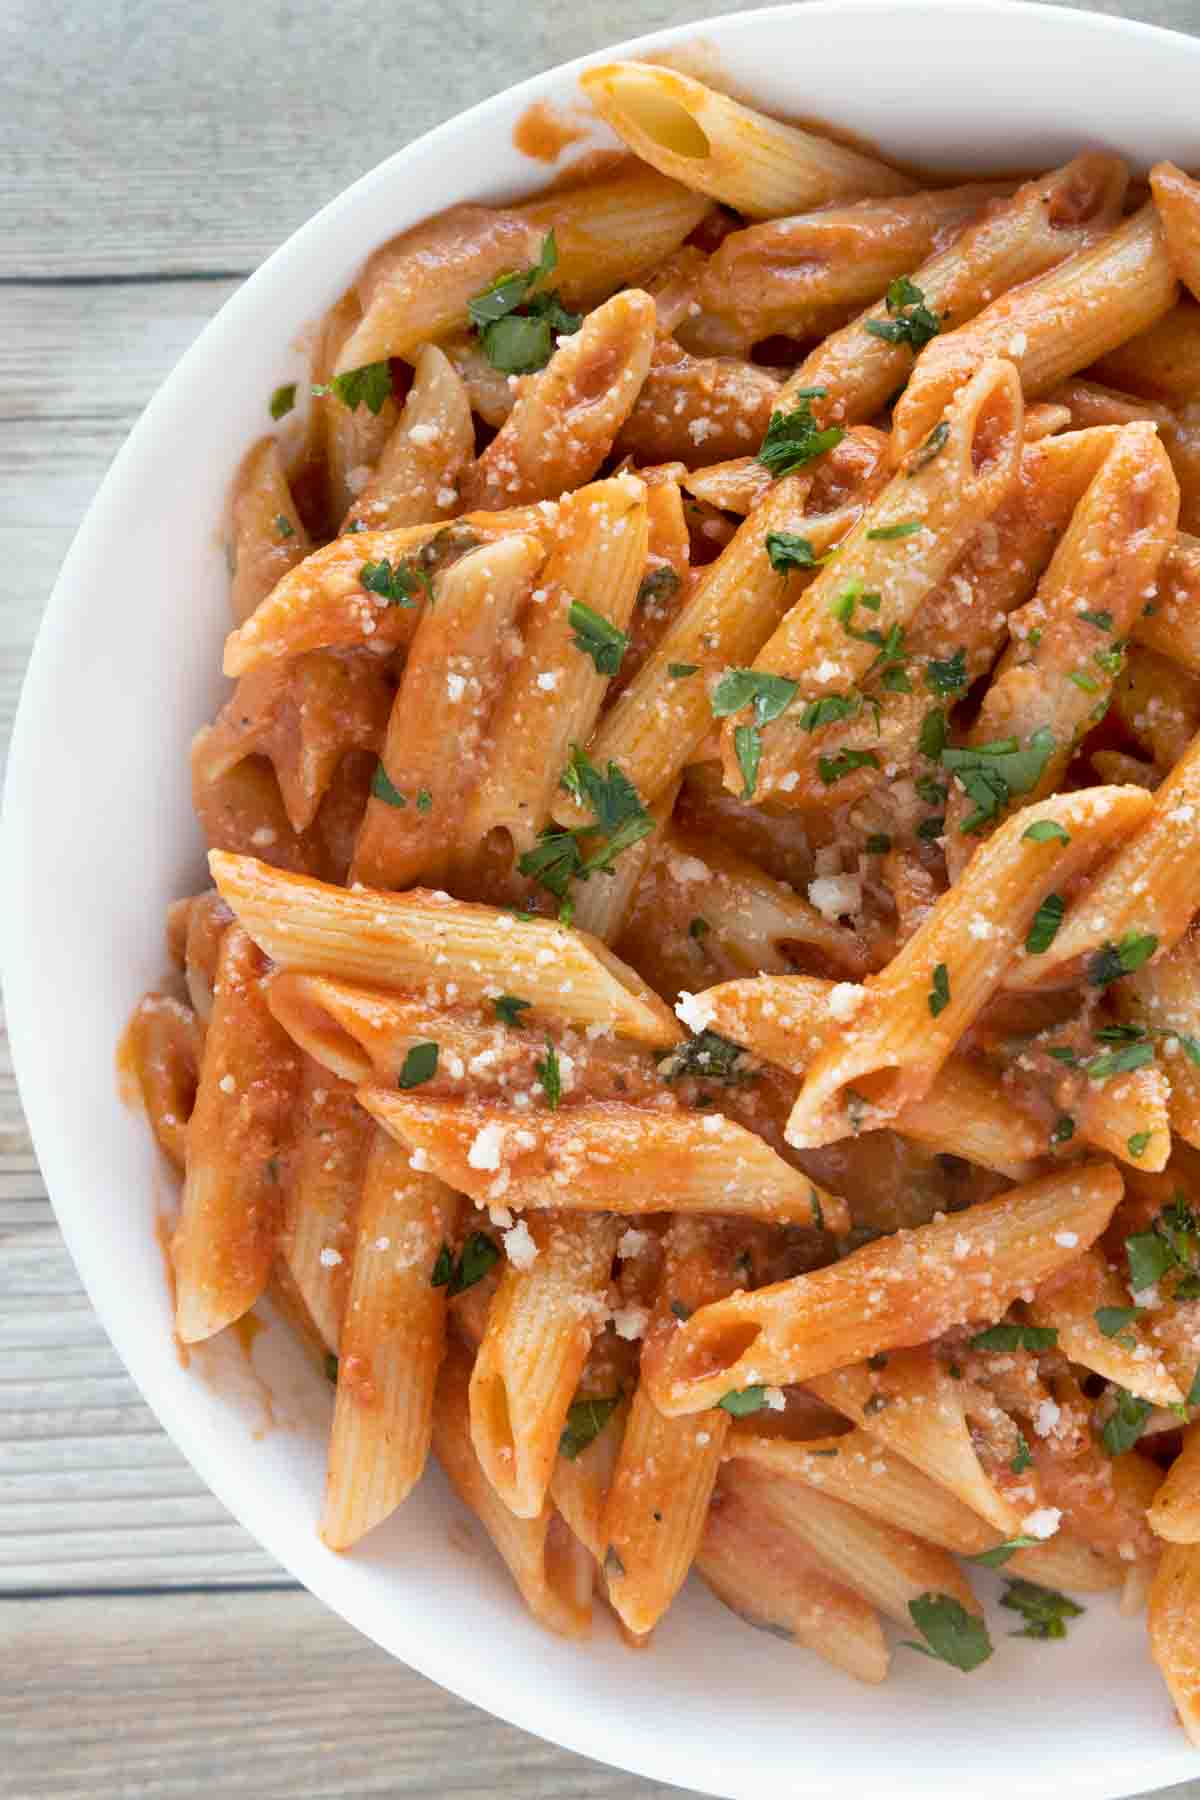 Penne alla Vodka in a white bowl garnished with chopped parsley